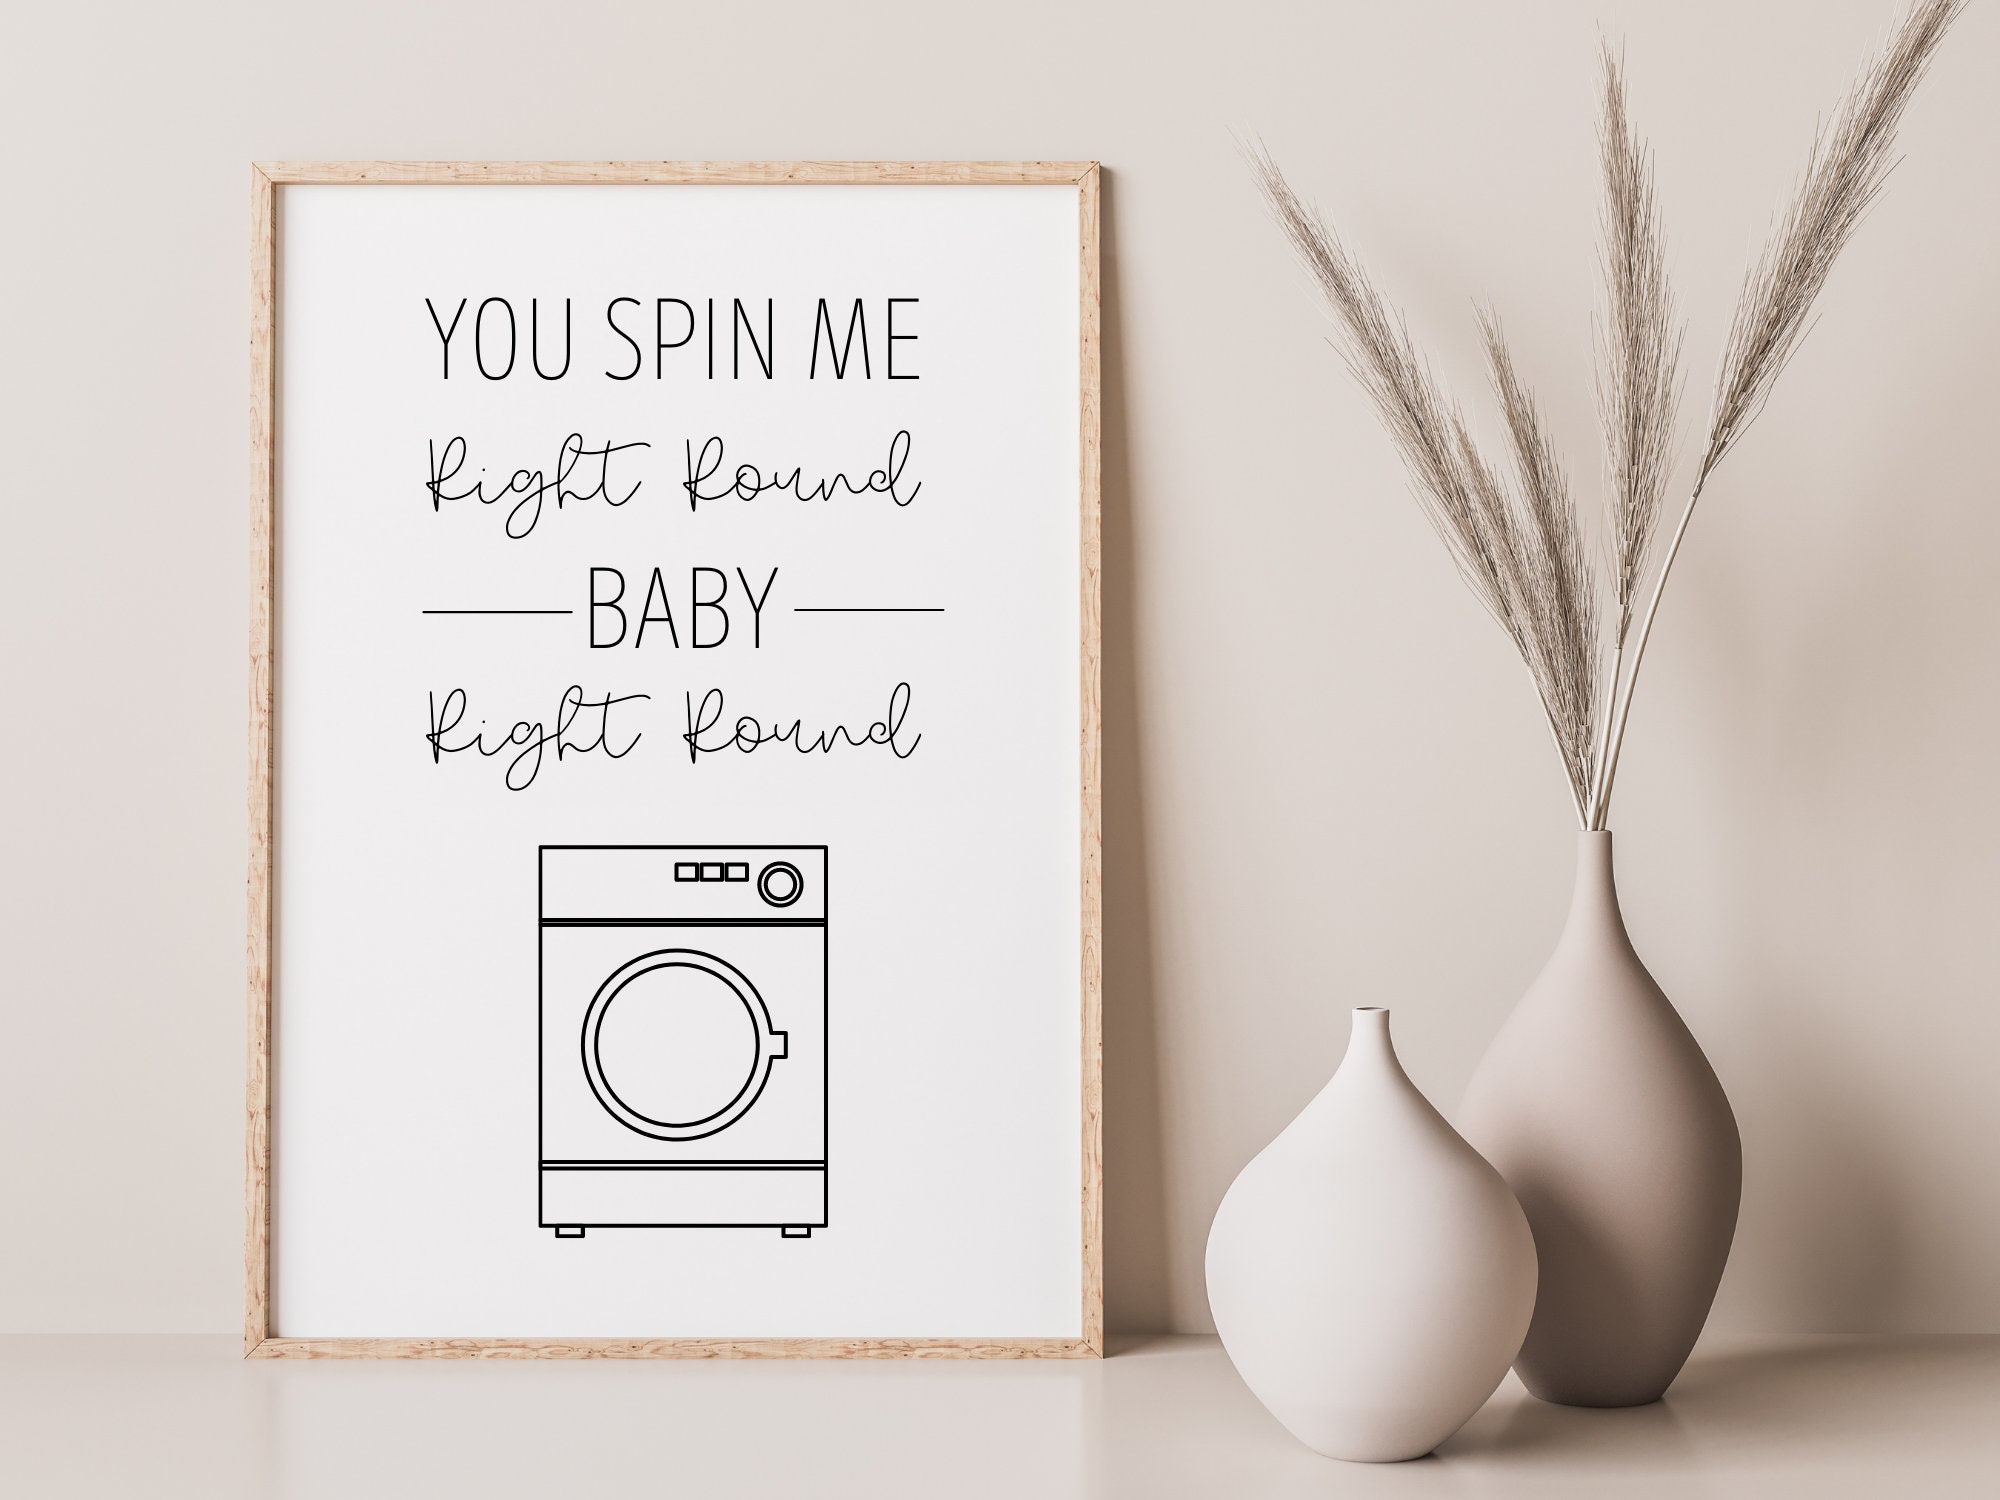 You Spin Me Right Round Baby Laundry Print Washing machine Laundry Room  Decor Utility Room Decor Accessories Funny Print Home Trend - .de